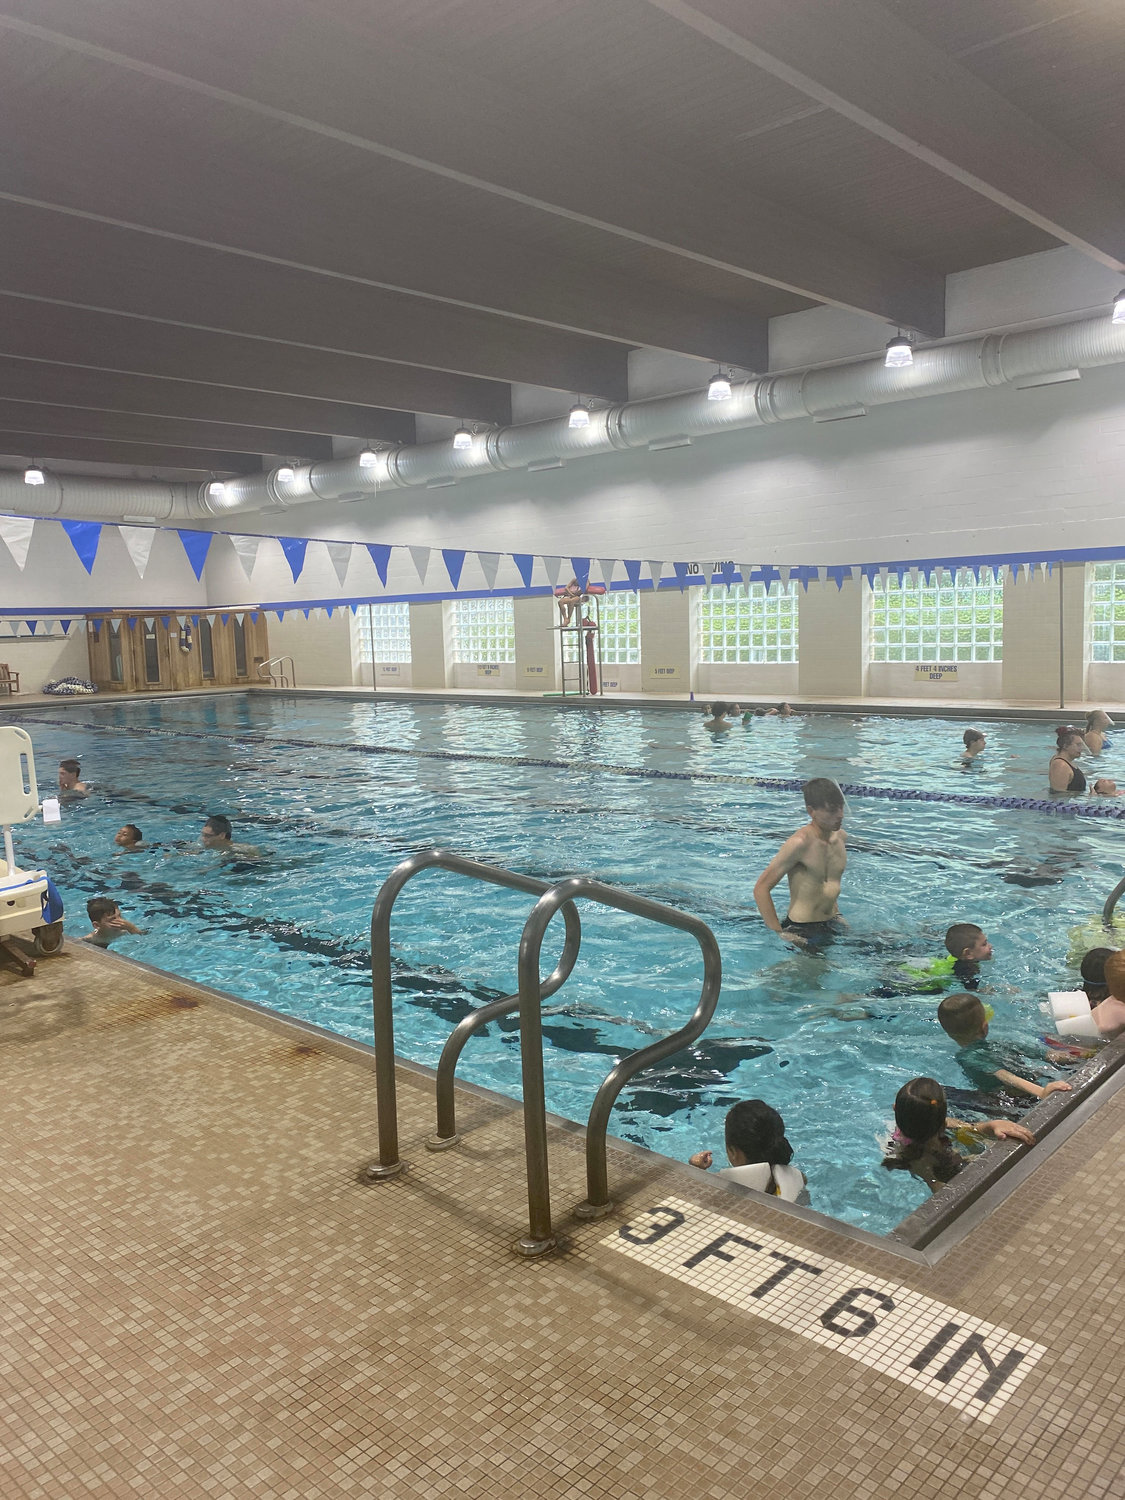 The Olympic-size swimming pool at Brookhaven Roe YMCA is where campers are taught swimming lessons.